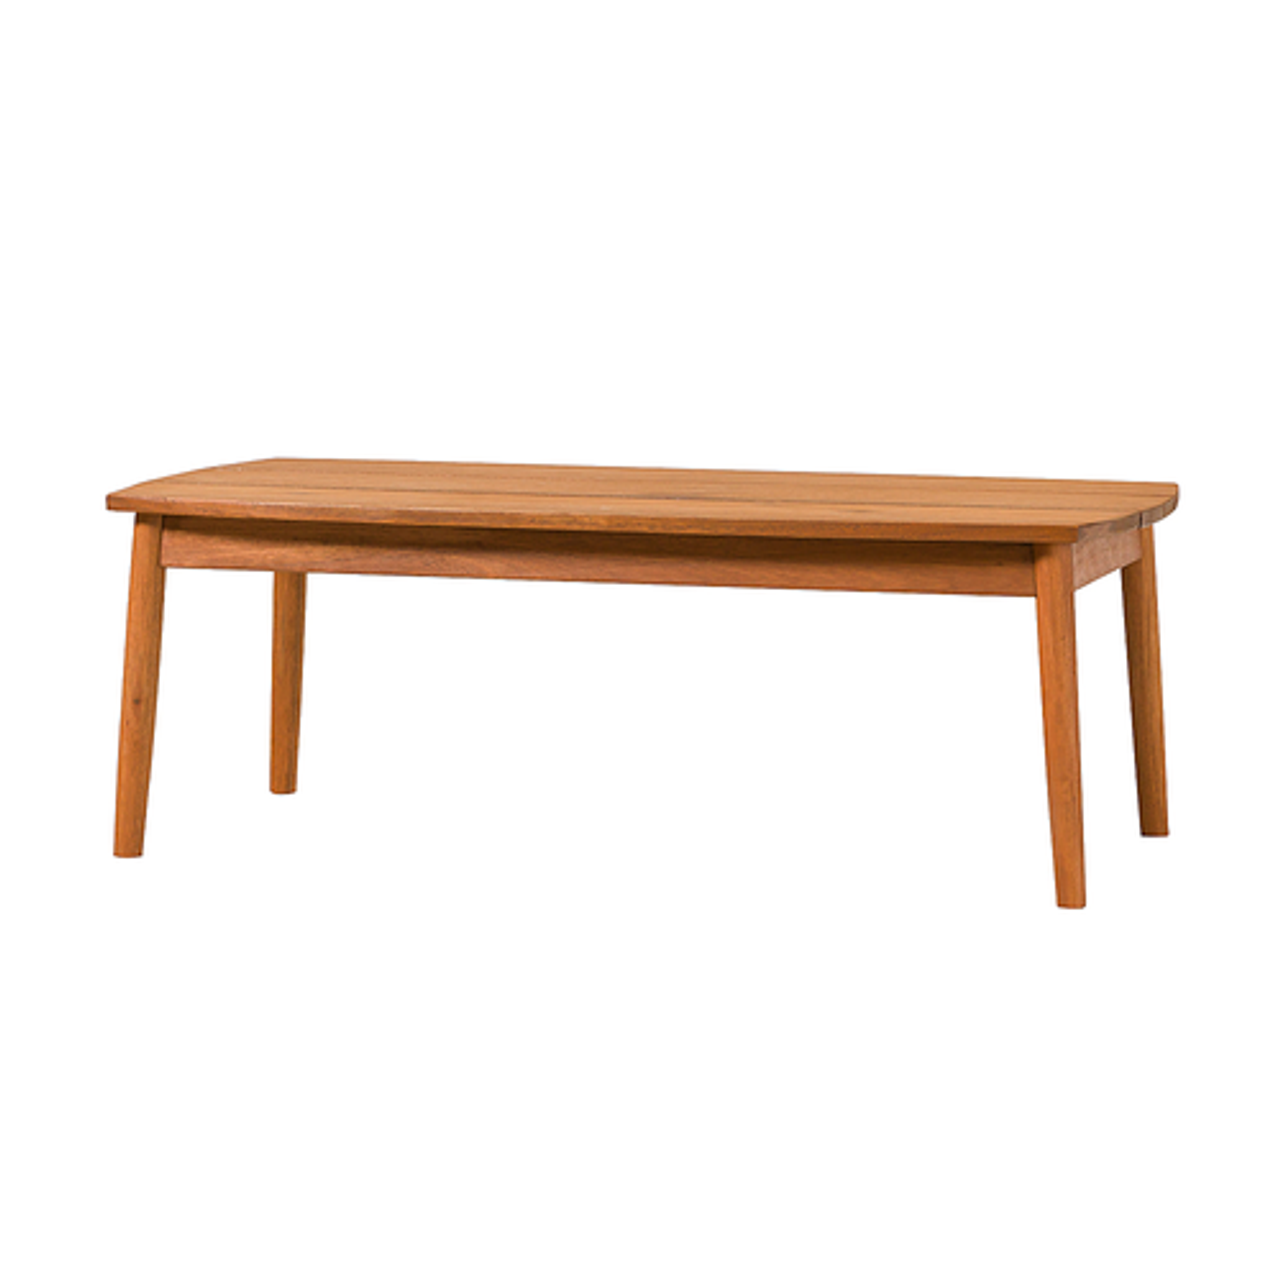 Walker Edison - Modern Solid Wood Spindle-Style Outdoor Coffee Table - Brown